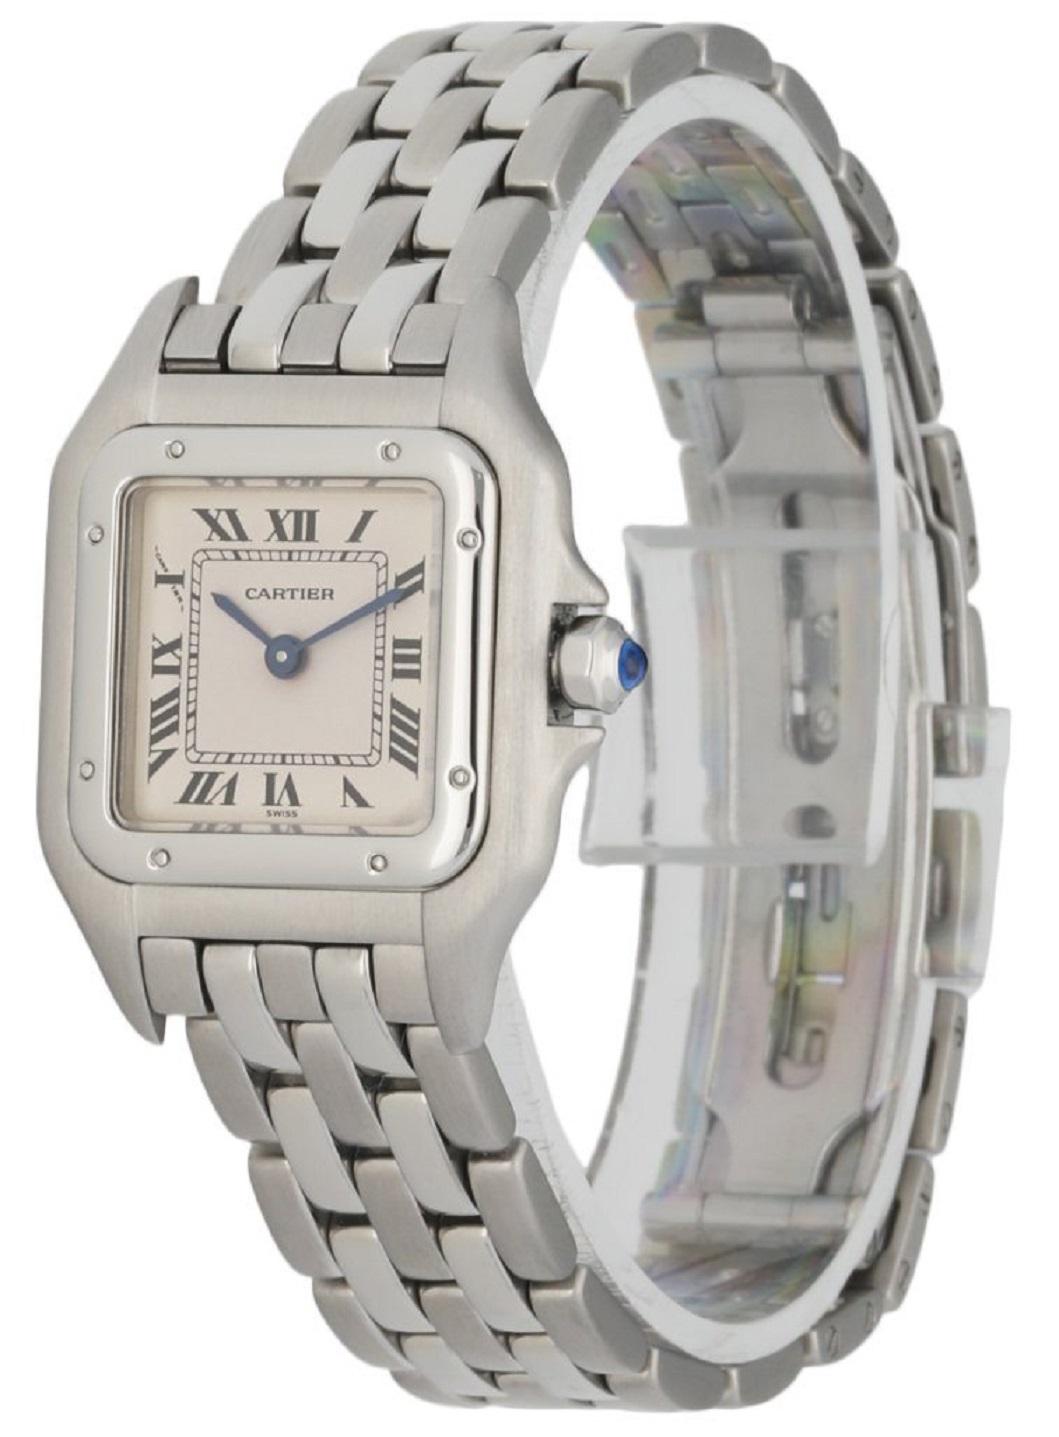 Cartier Panthere 1320 Ladies Watch. 22mm Stainless Steel case. Stainless Steel smooth bezel. Off-White dial with blue steel hands and index hour markers. Minute markers on the inner dial. Stainless Steel Bracelet with hidden butterfly Clasp.Will fit